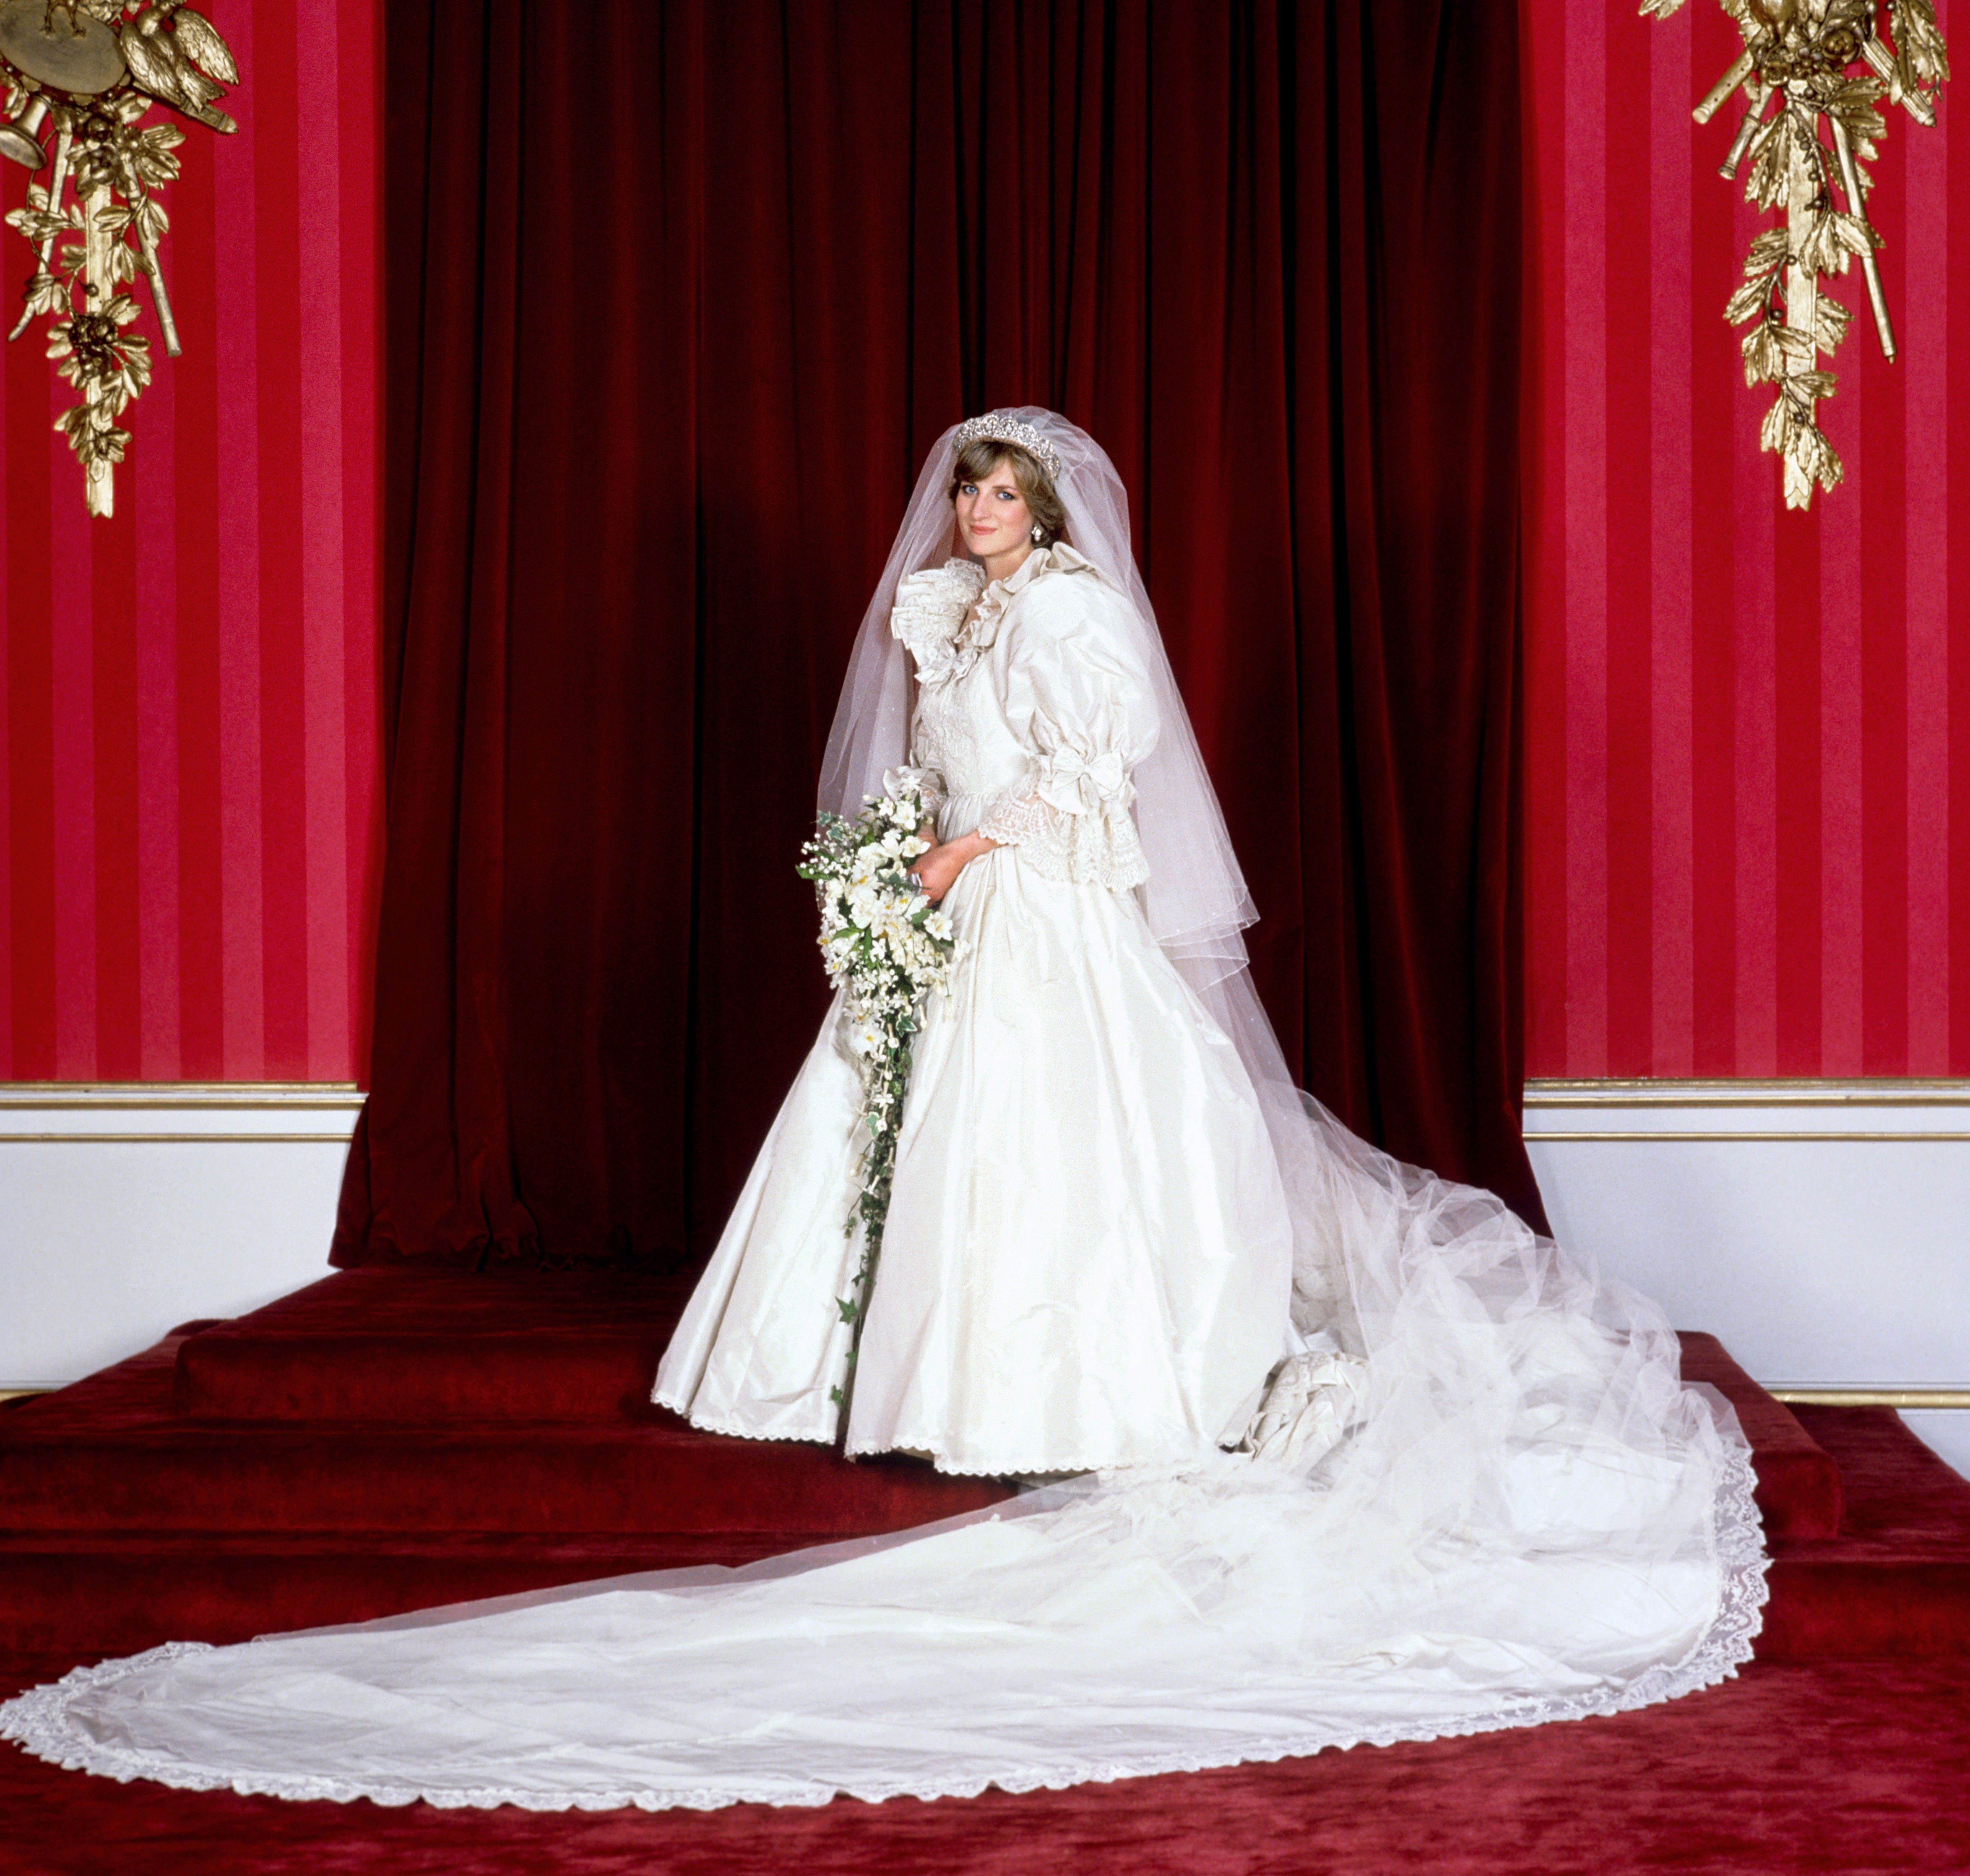 The Princess of Wales in her bridal gown at Buckingham Palace after her marriage to Prince Charles at St. Paul’s Cathedral